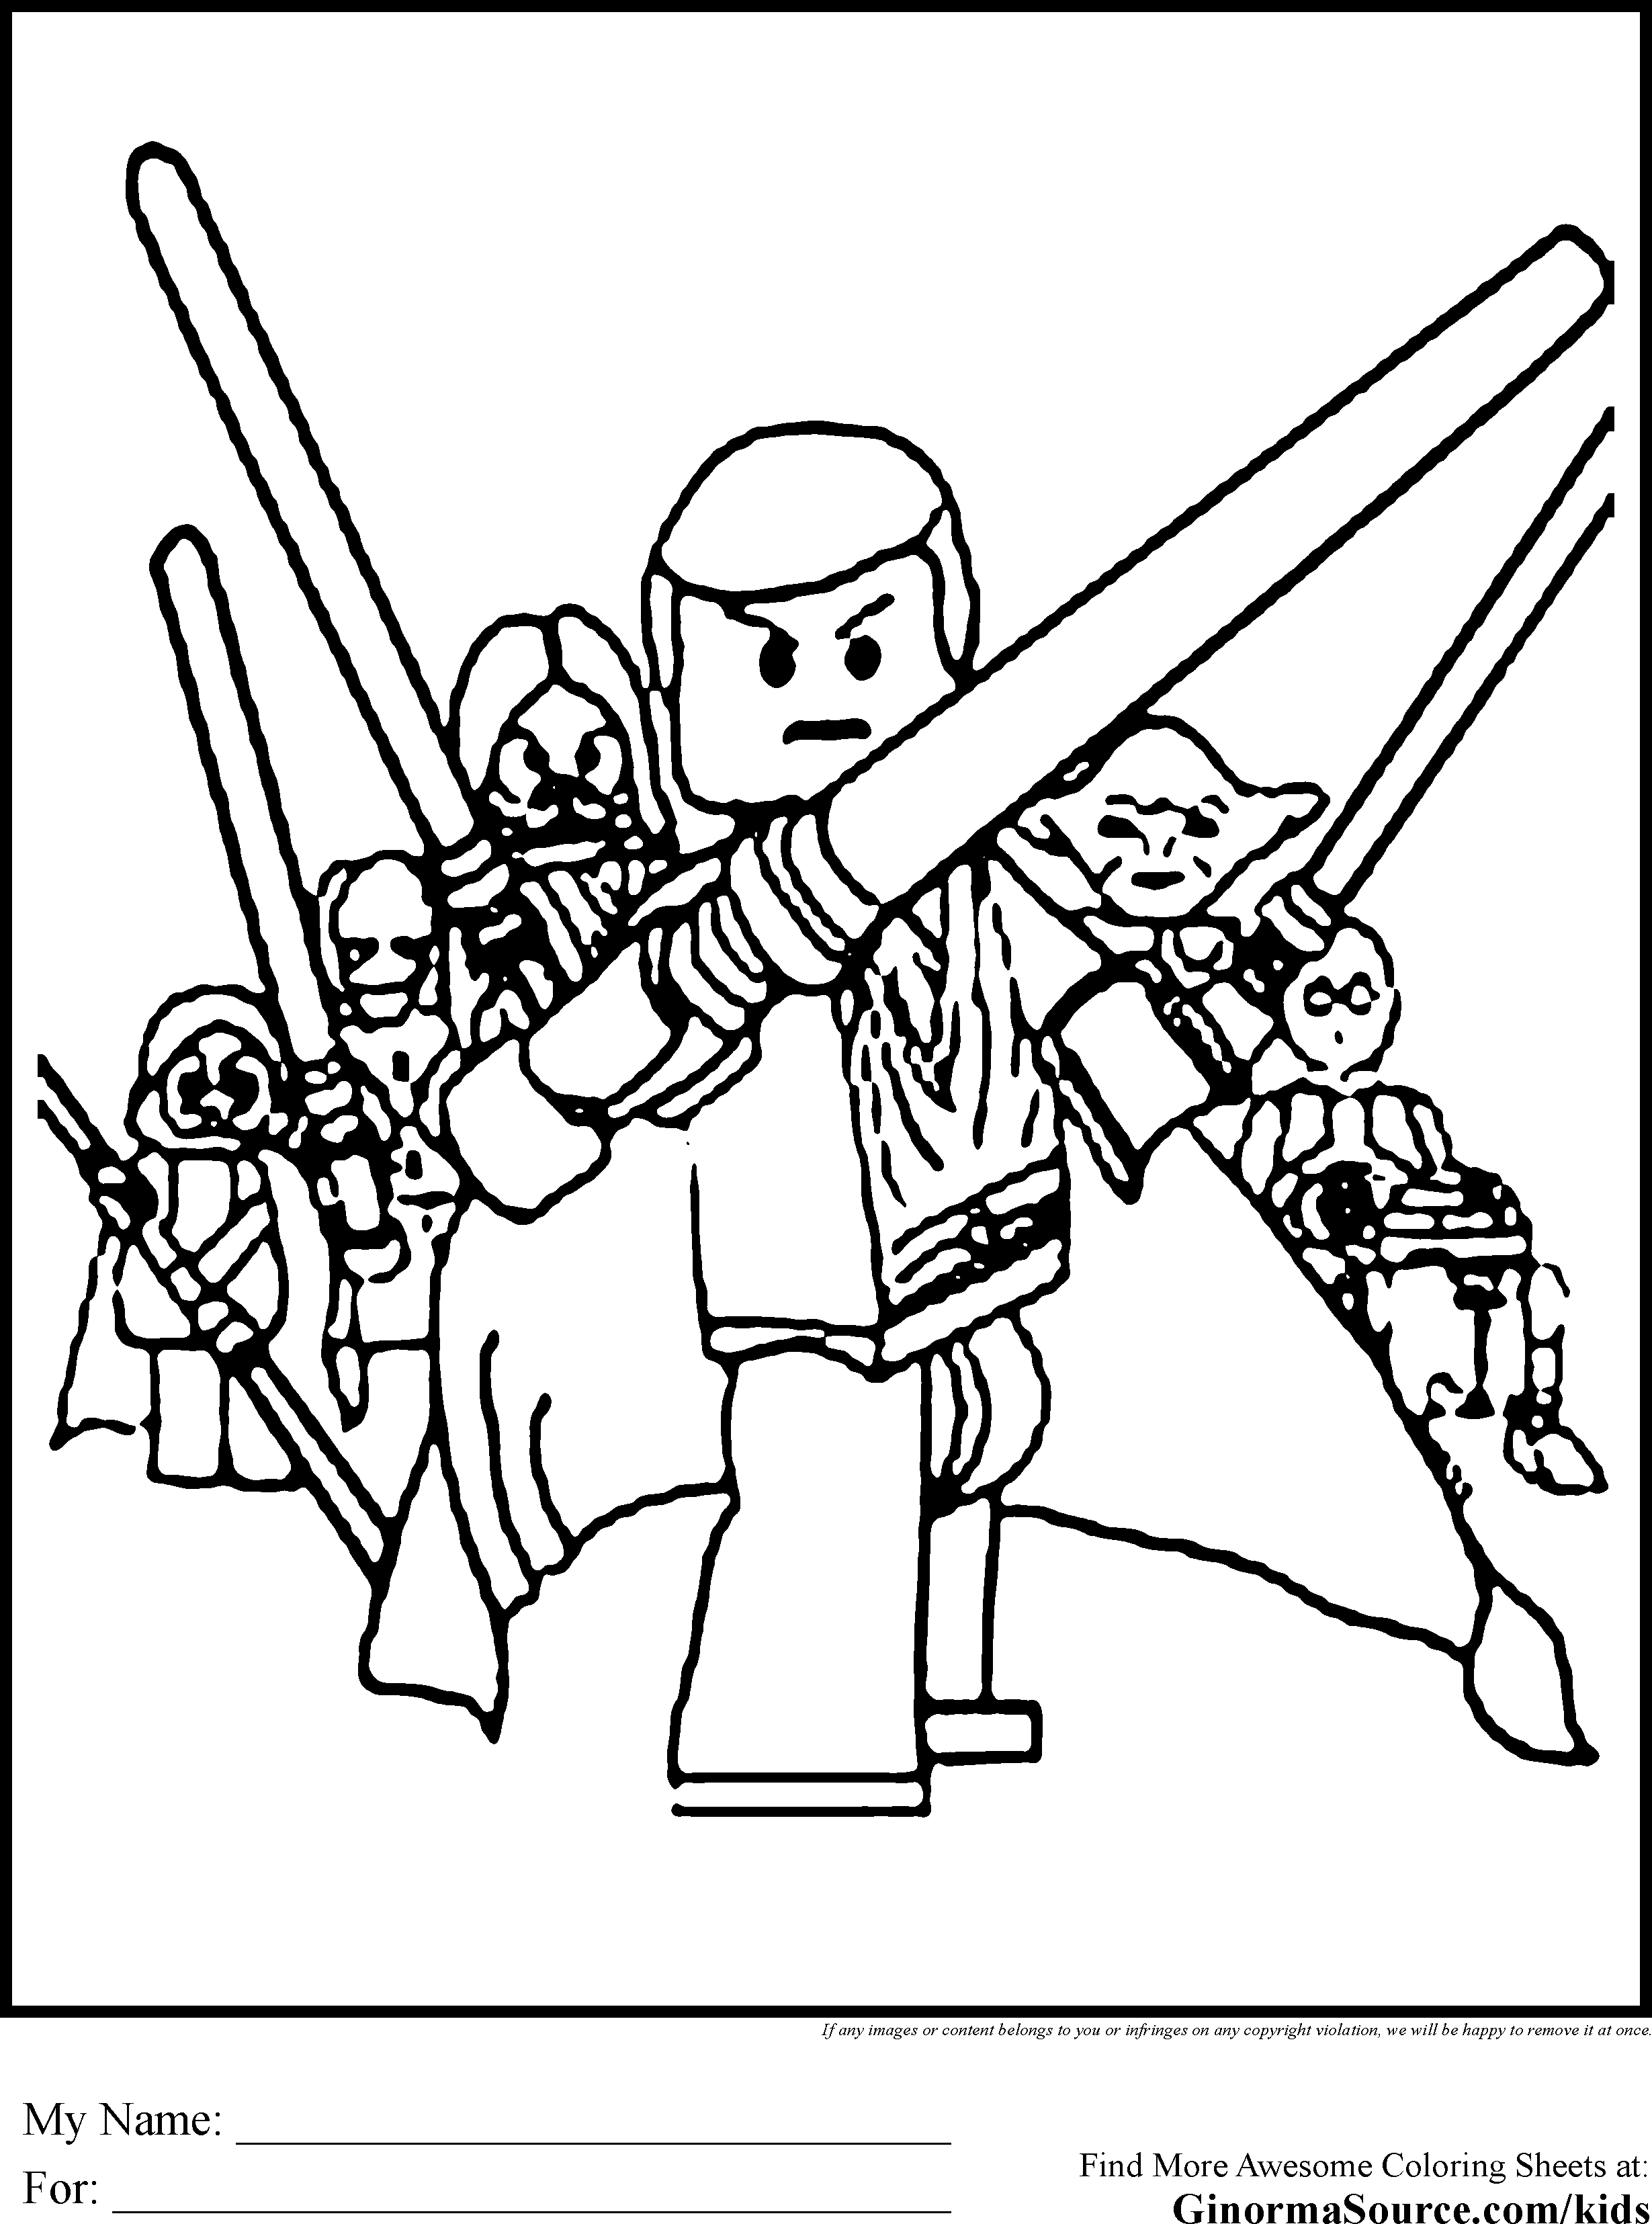 Star Wars Coloring Page - Coloring pages